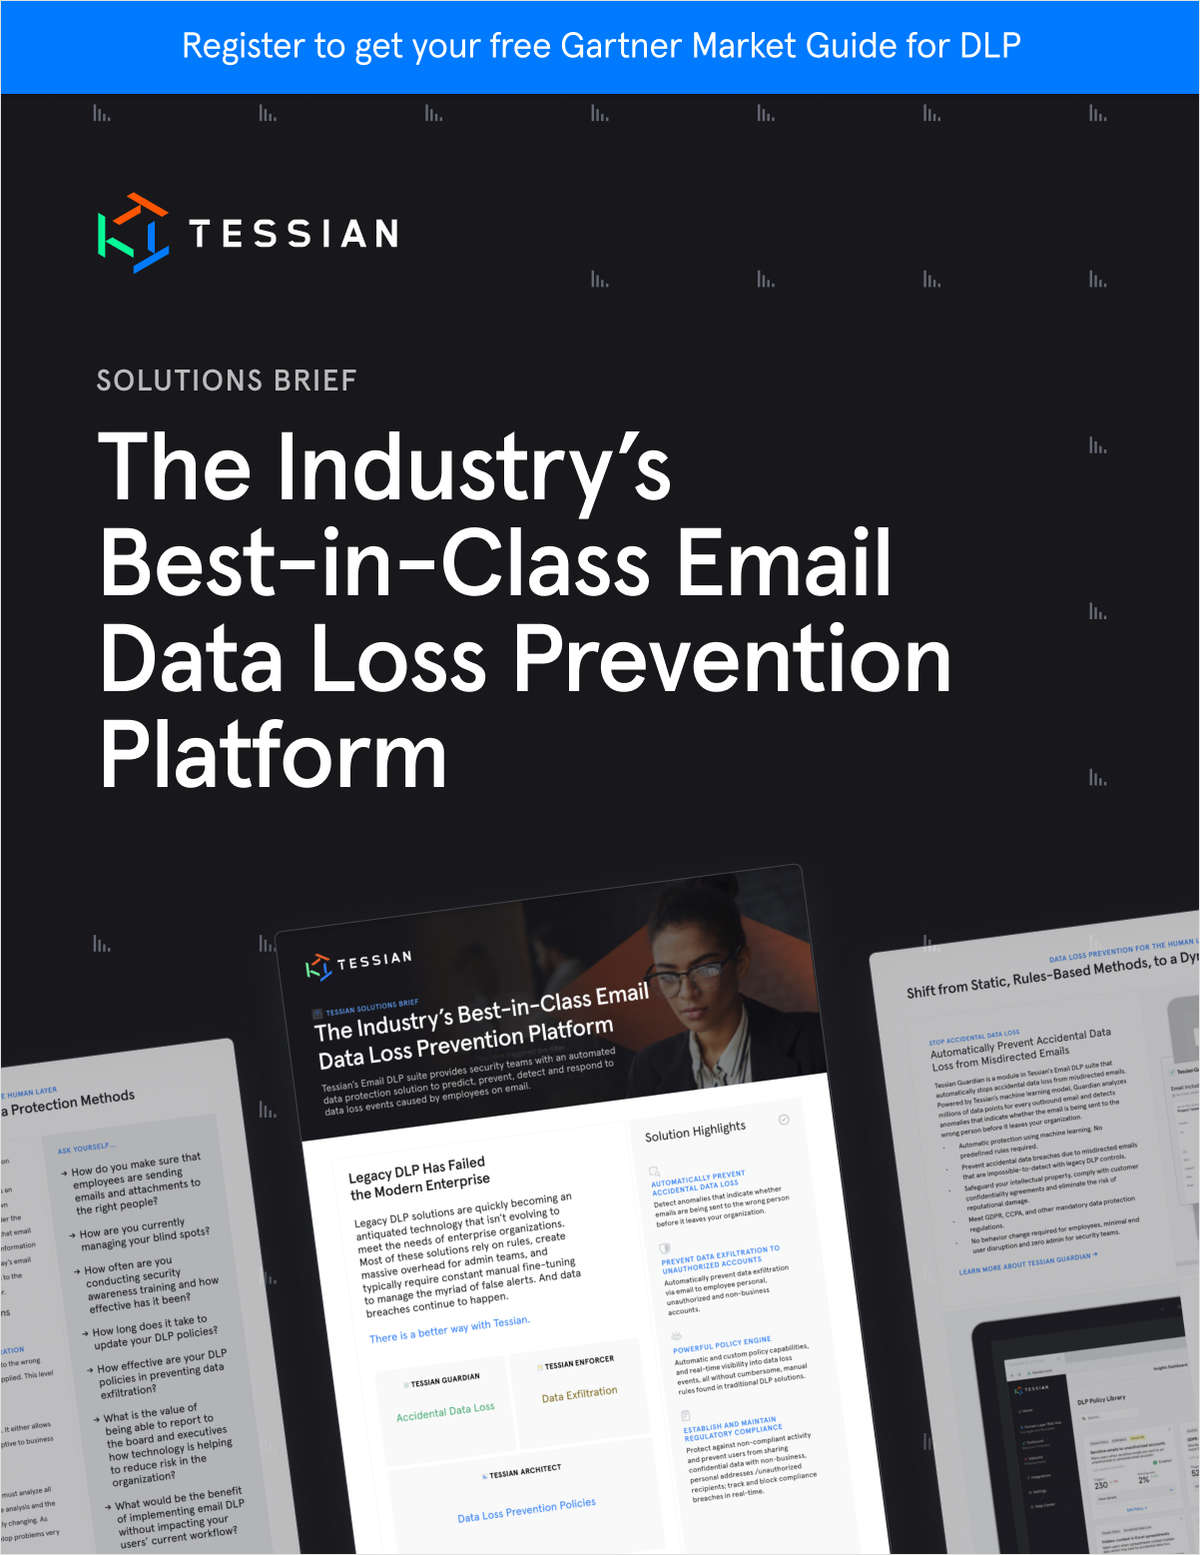 The Industry's Best-in-Class Email Data Loss Prevention Platform